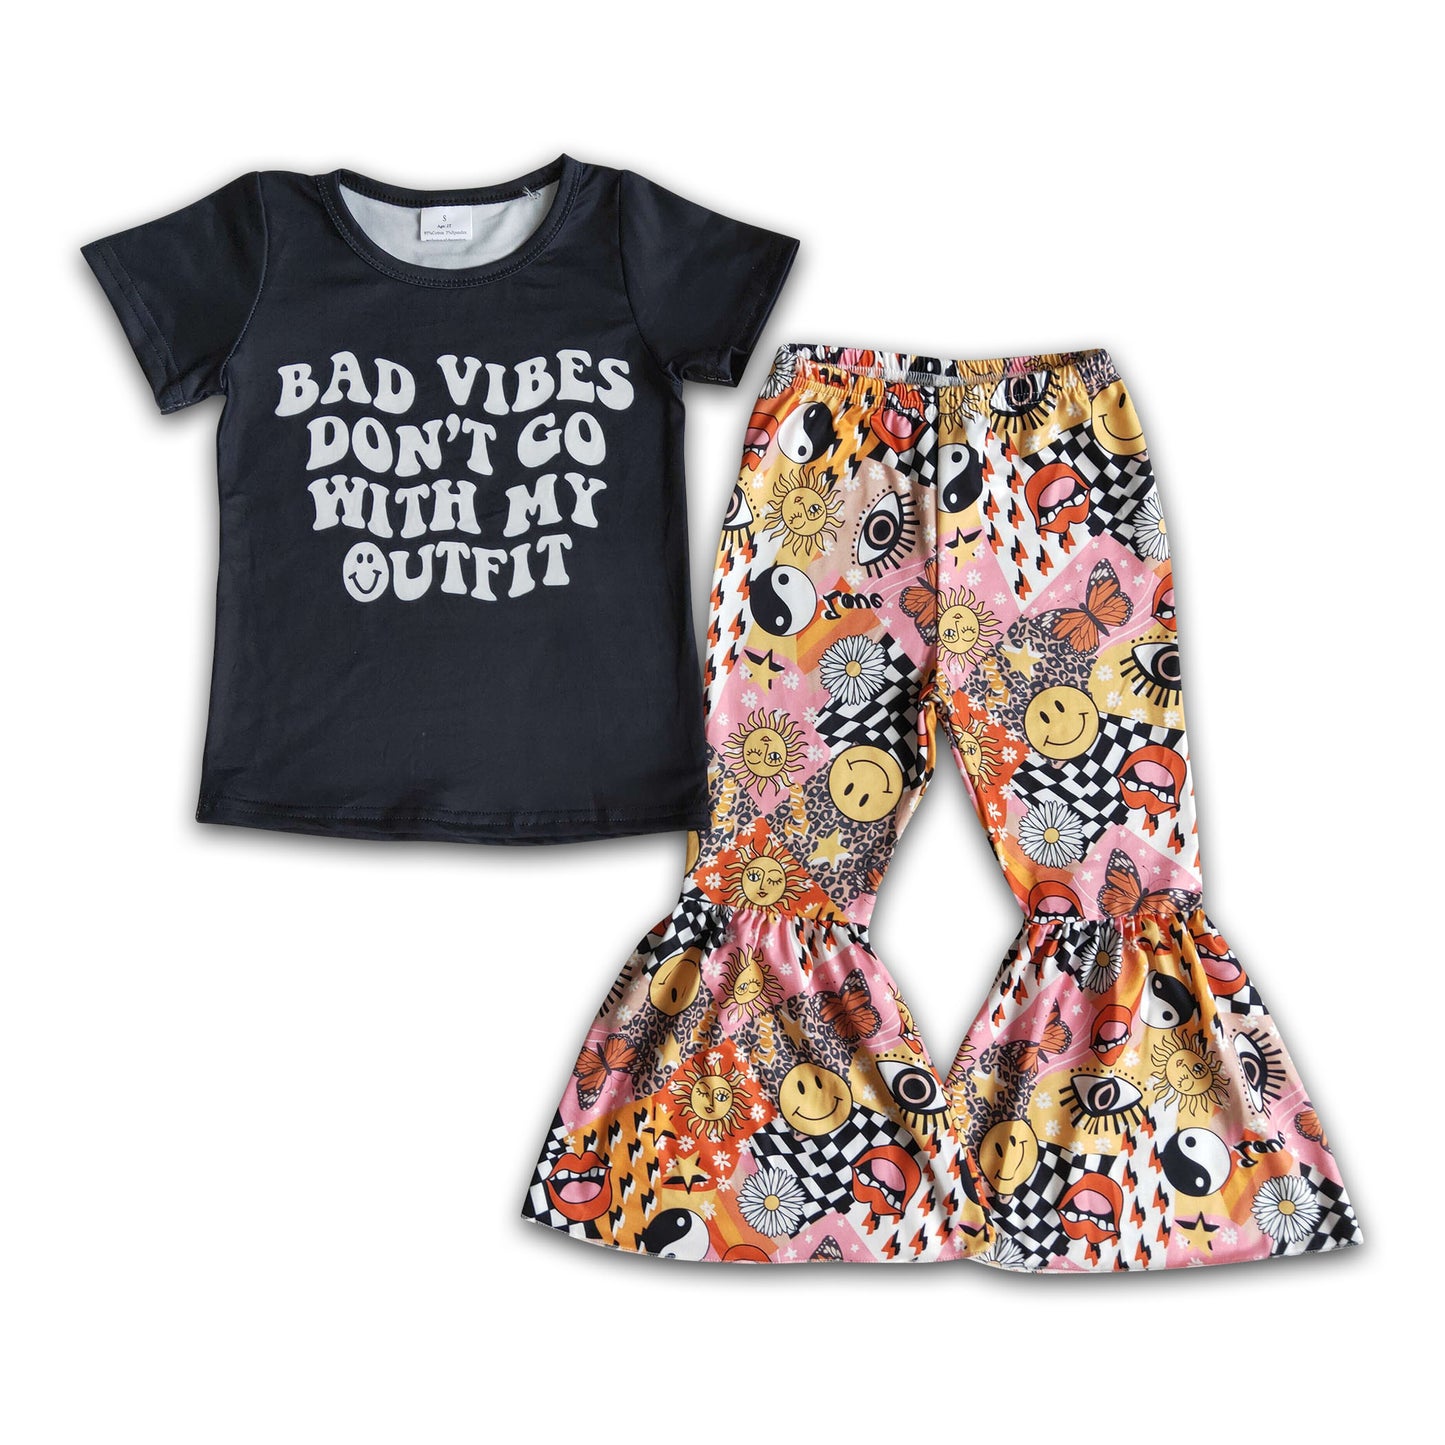 Bad vibes don't go with my outfit sun pants girls clothing set – Yawoo ...